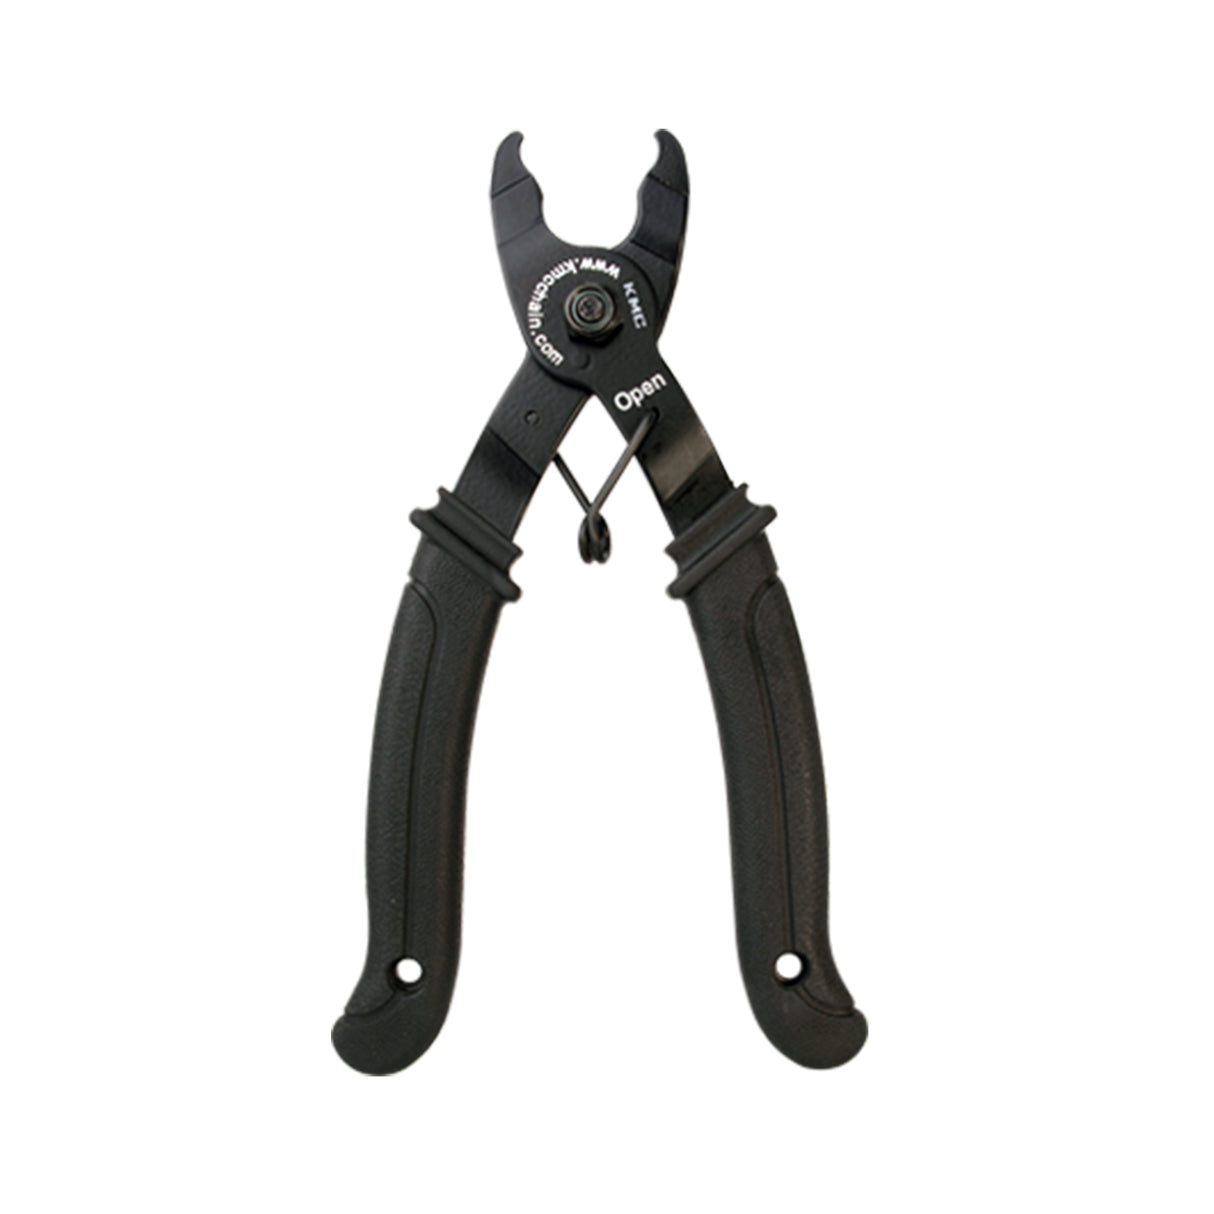 KMC Missing Link Remover Plier